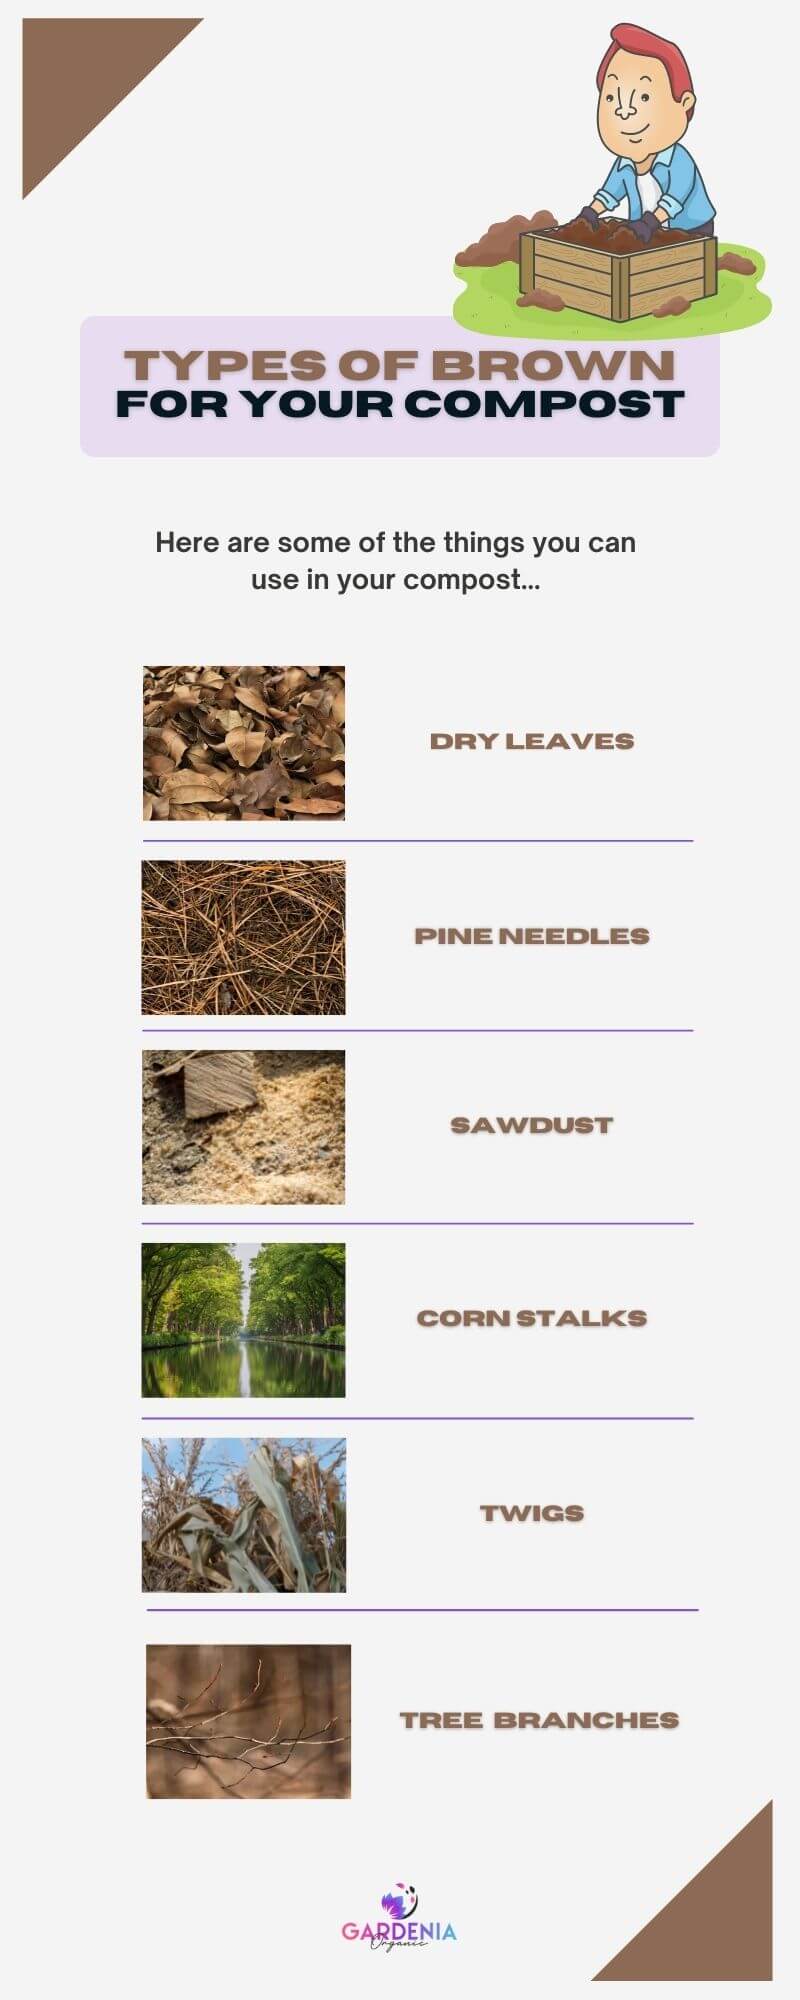 Types of browns you can use in compost